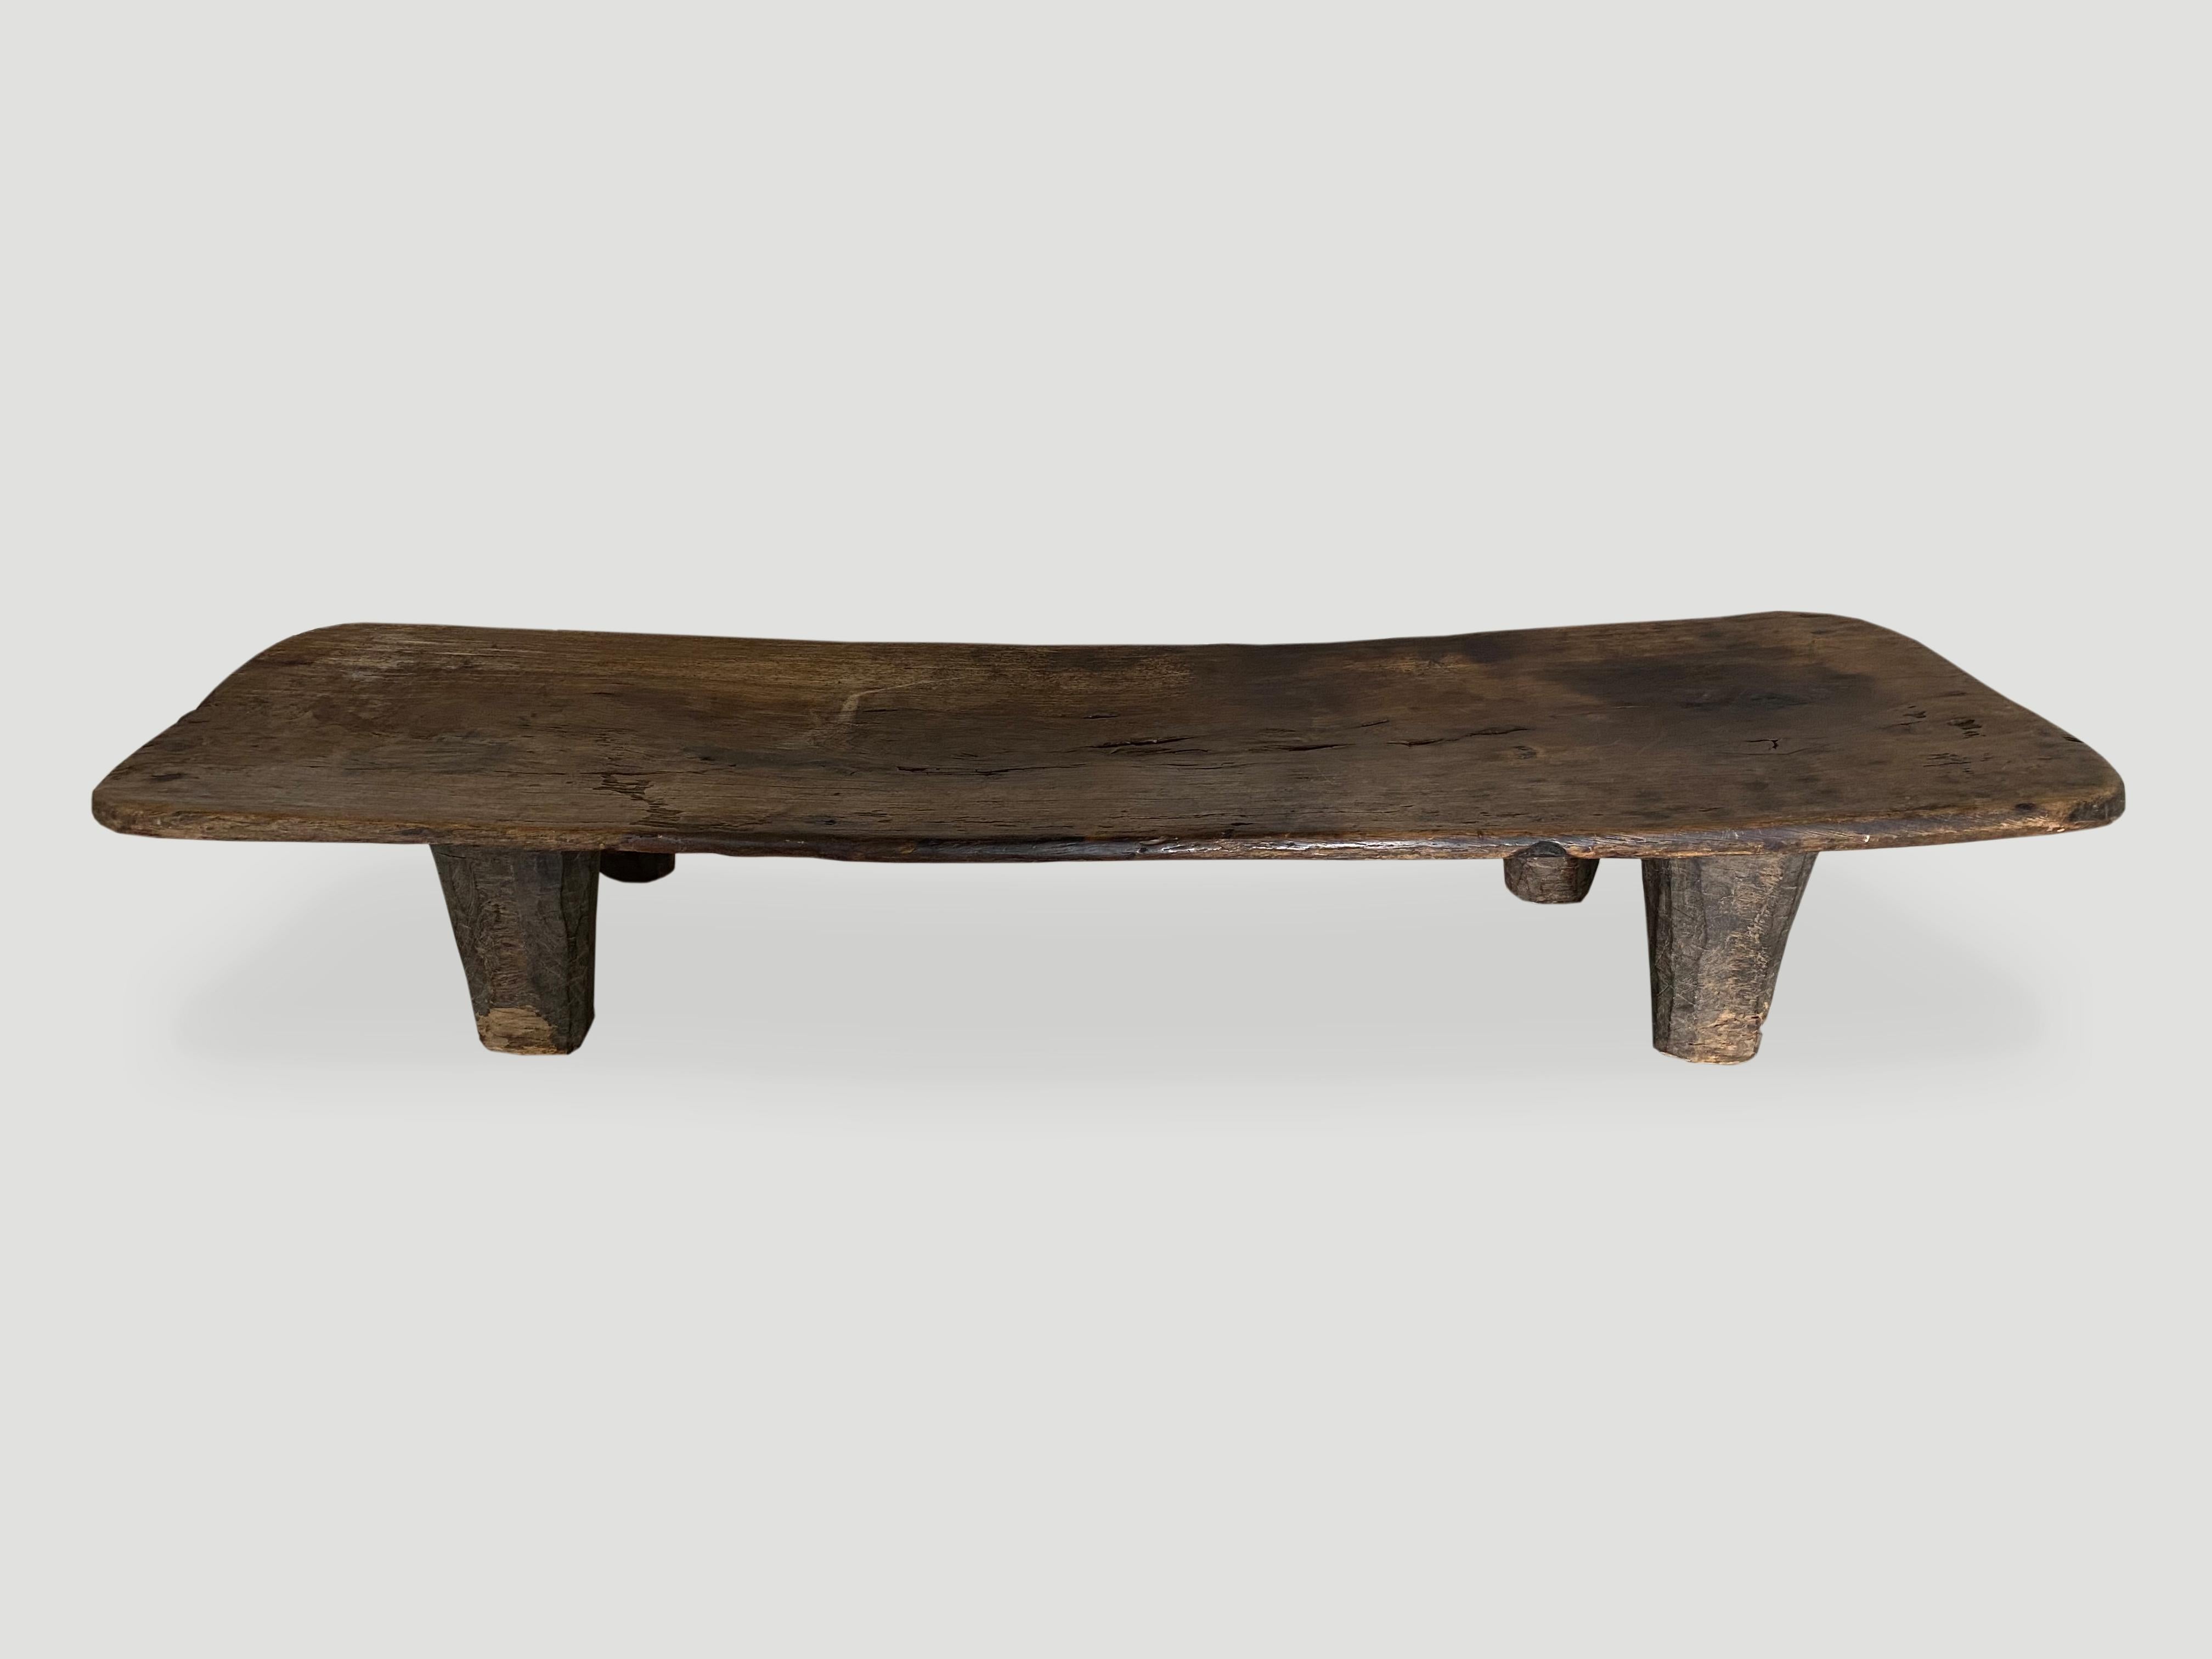 Wood Andrianna Shamaris Antique African Bench, Coffee Table or Daybed